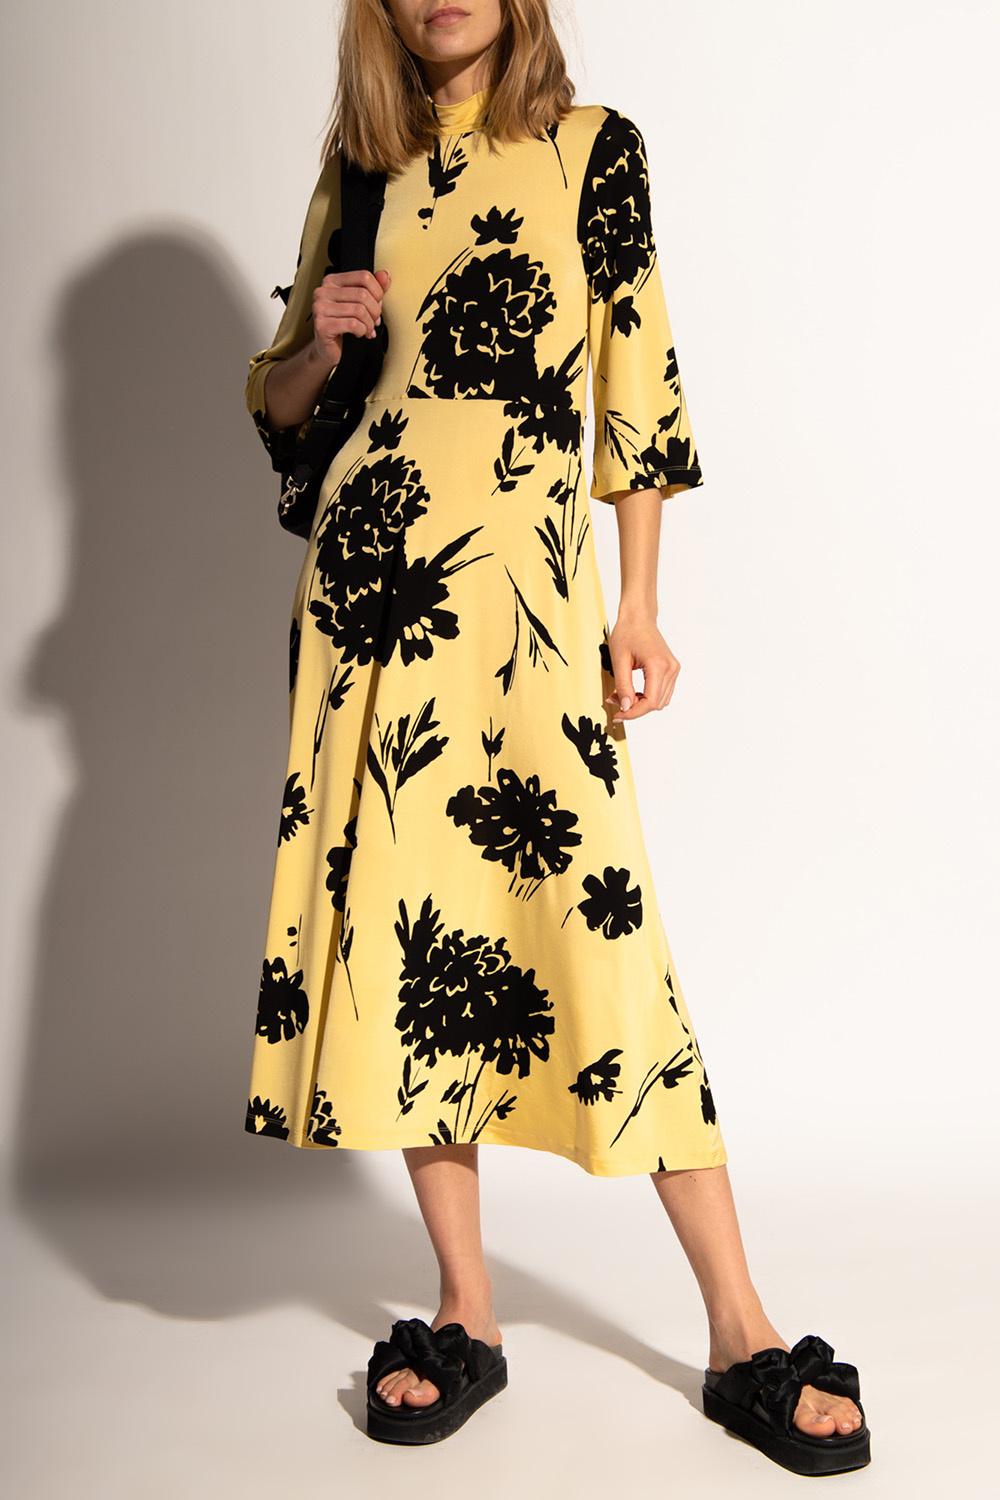 Floral Motif Dress in Yellow ...